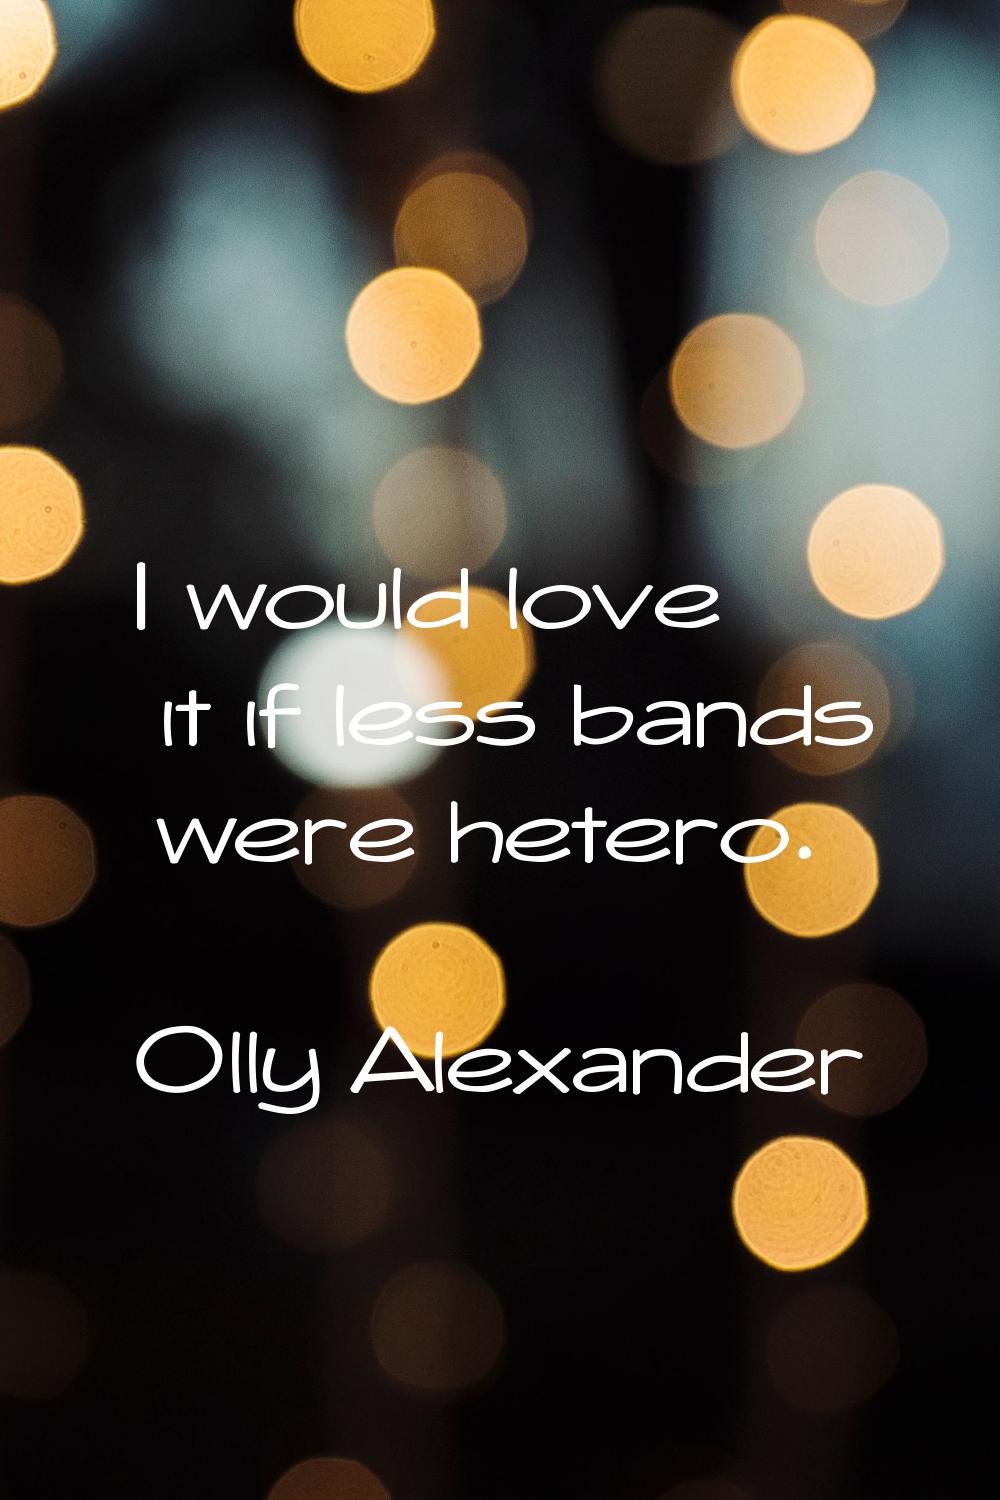 I would love it if less bands were hetero.